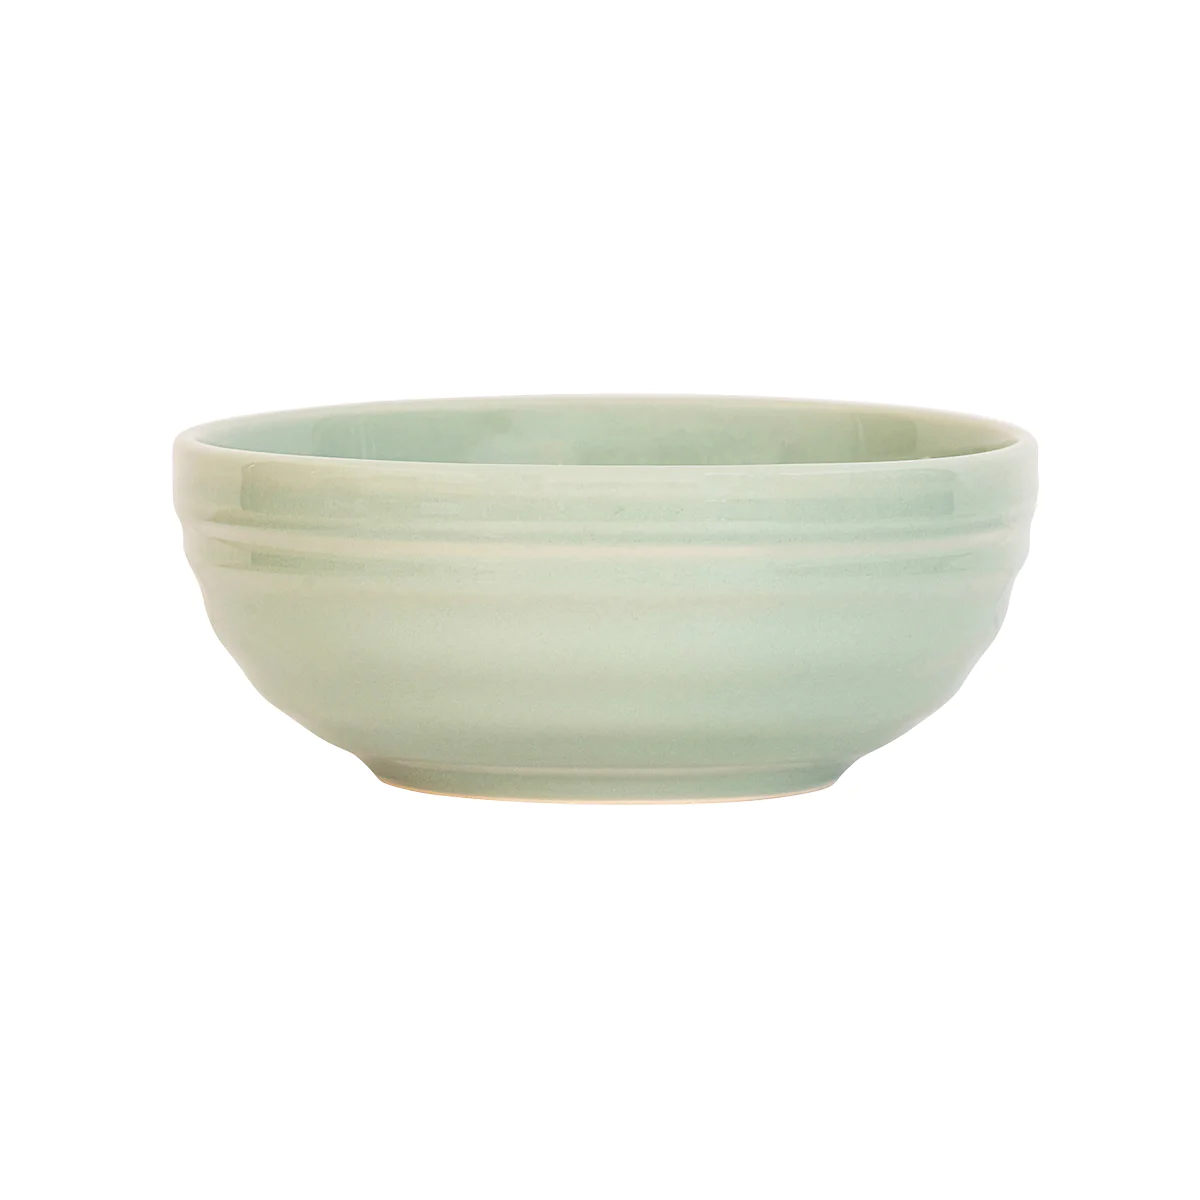 Bilbao Cereal/ Ice Cream Bowl in Sage